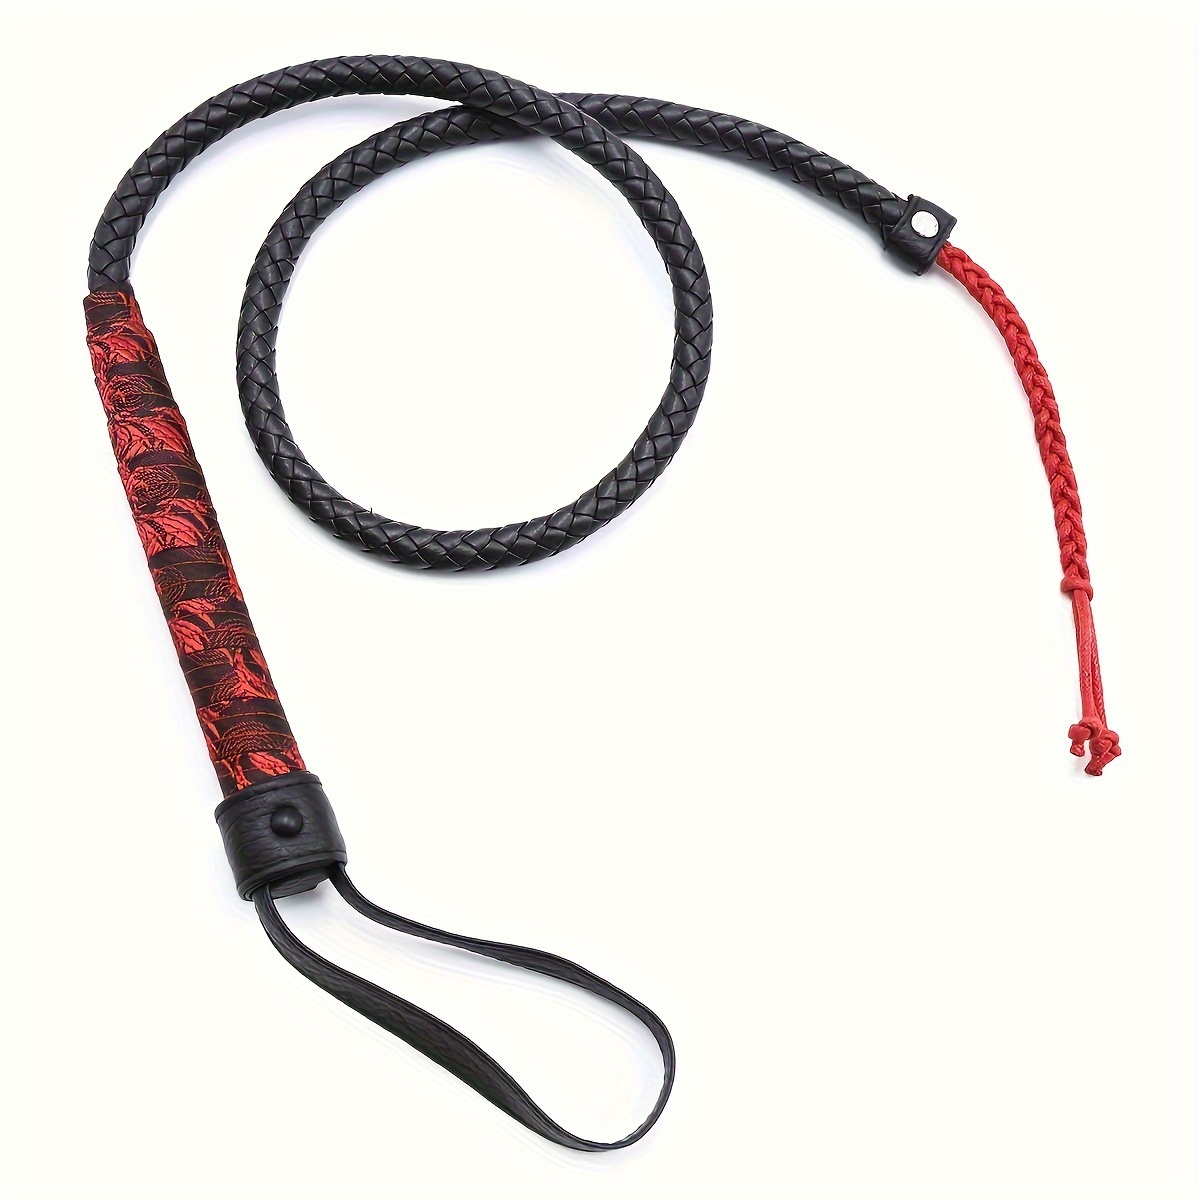 

1pc, Extended Horse Whip, Pu Leather Whip For Riding Training, Outdoor Sports Training And Performance Equestrian Supplies